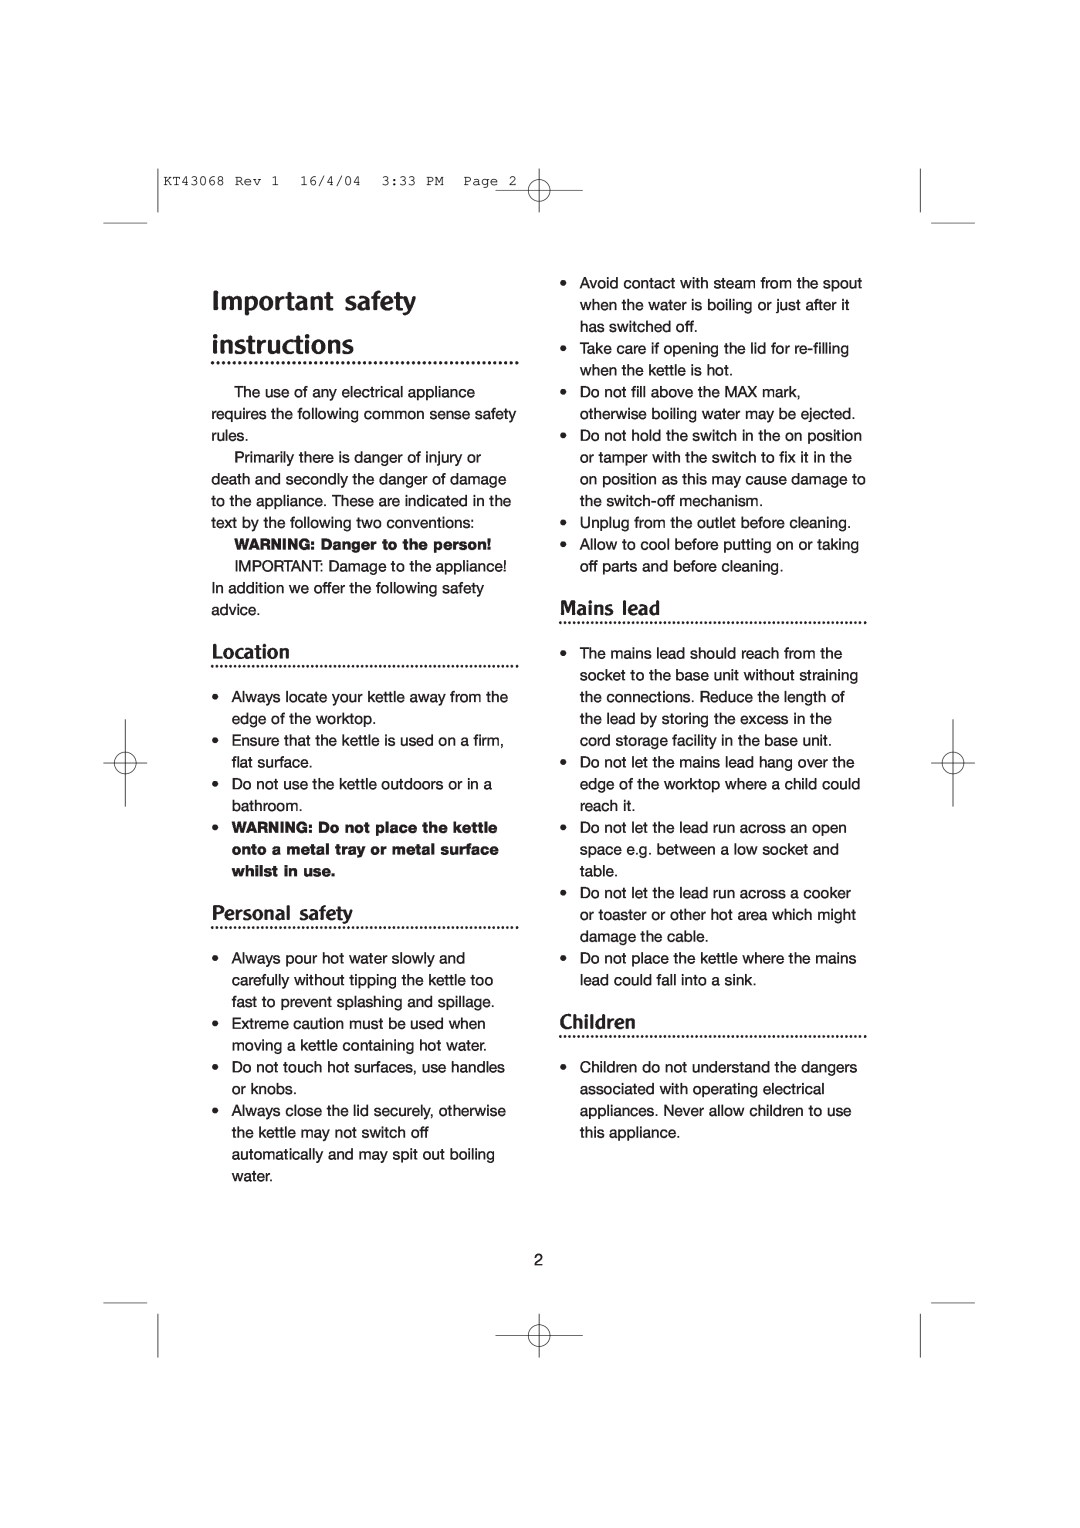 Morphy Richards Jug Kettle manual Important safety instructions, WARNING Danger to the person, Location, Personal safety 